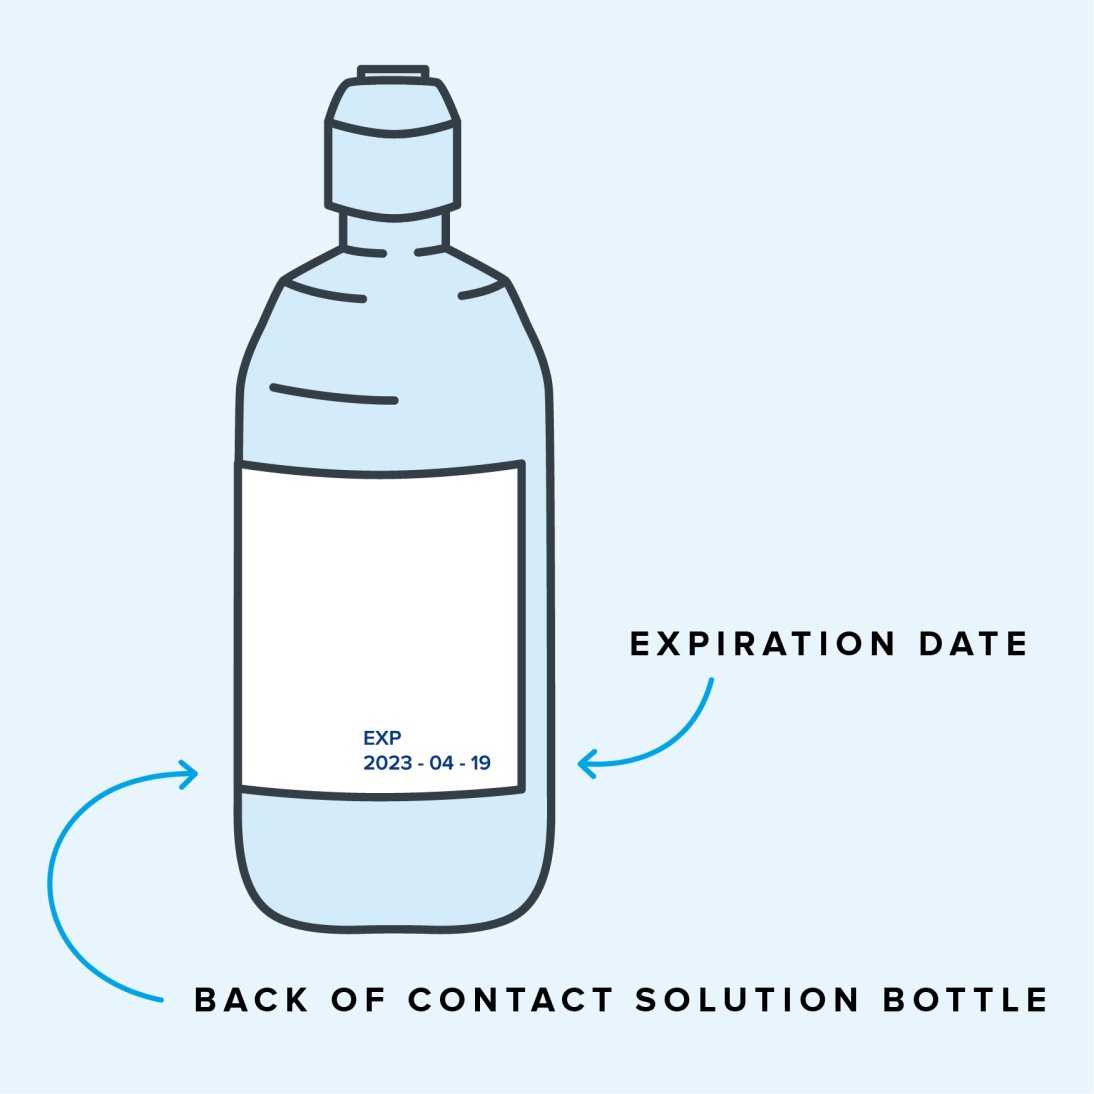 Illustration of a contact solution bottle label and location of the expiration date